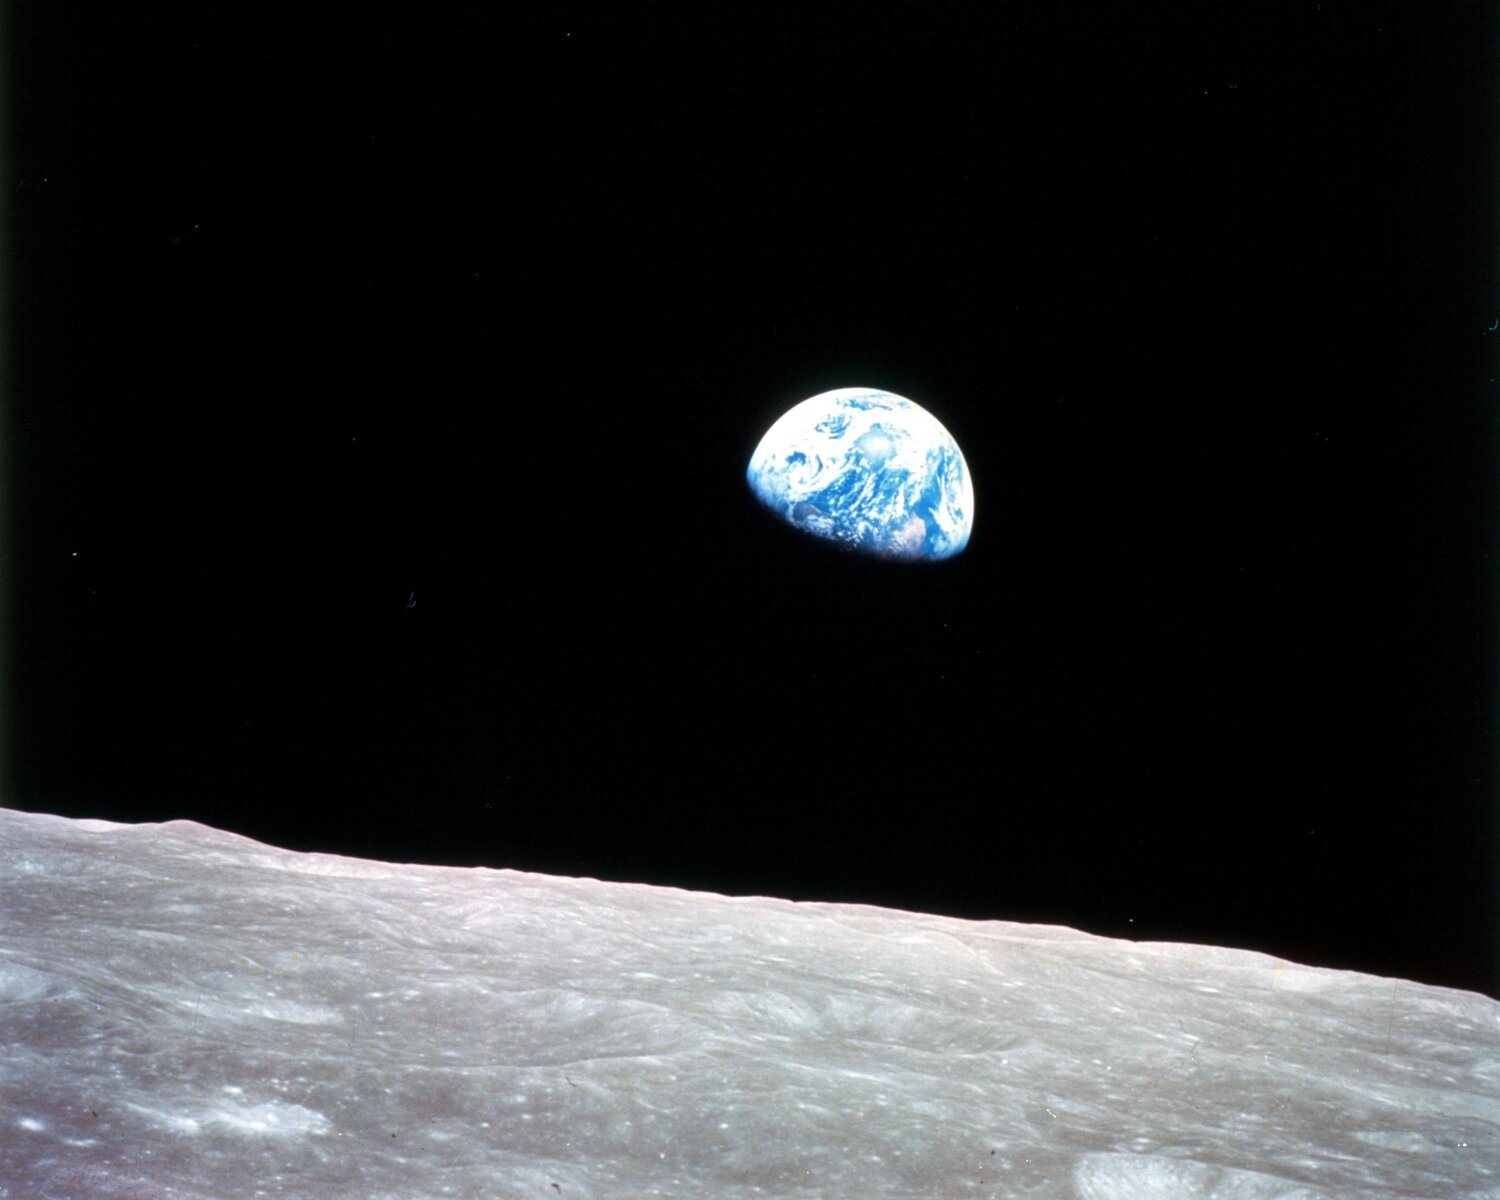  - Mother Earth rising, as seen from Mother Moon. (Photo Credit: NASA)